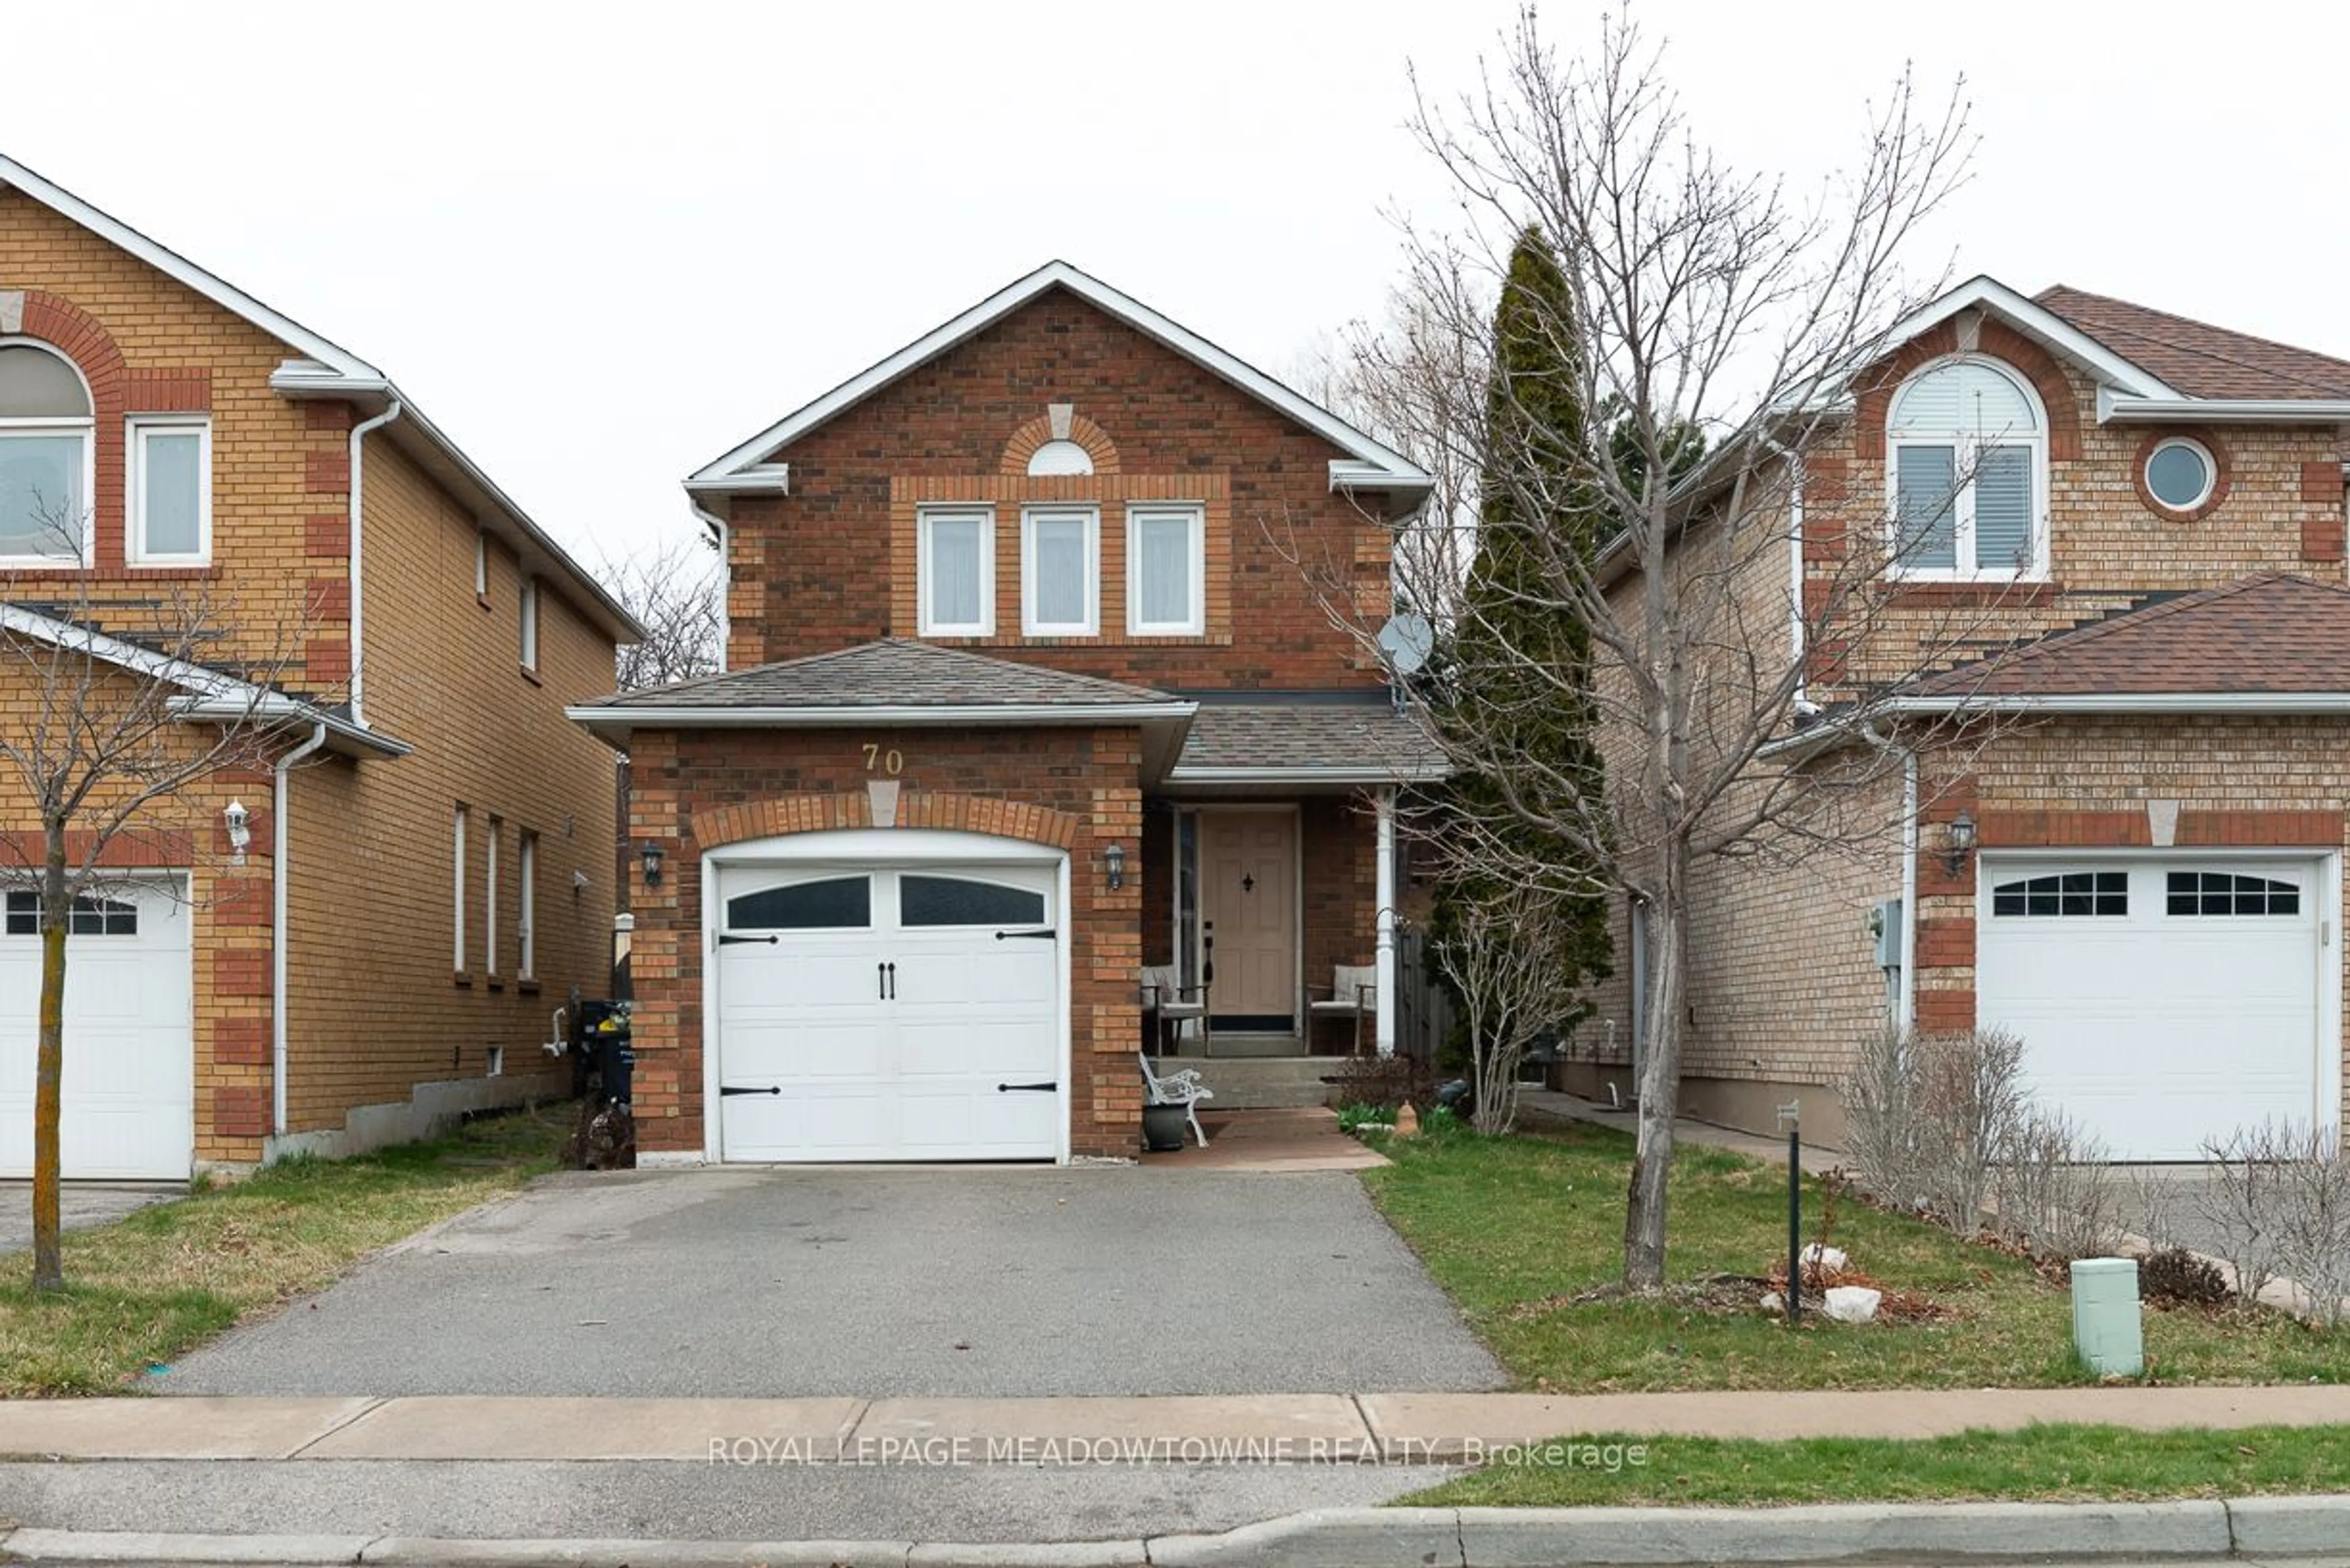 Home with brick exterior material for 70 Ravenscliff Crt, Brampton Ontario L6X 4N9